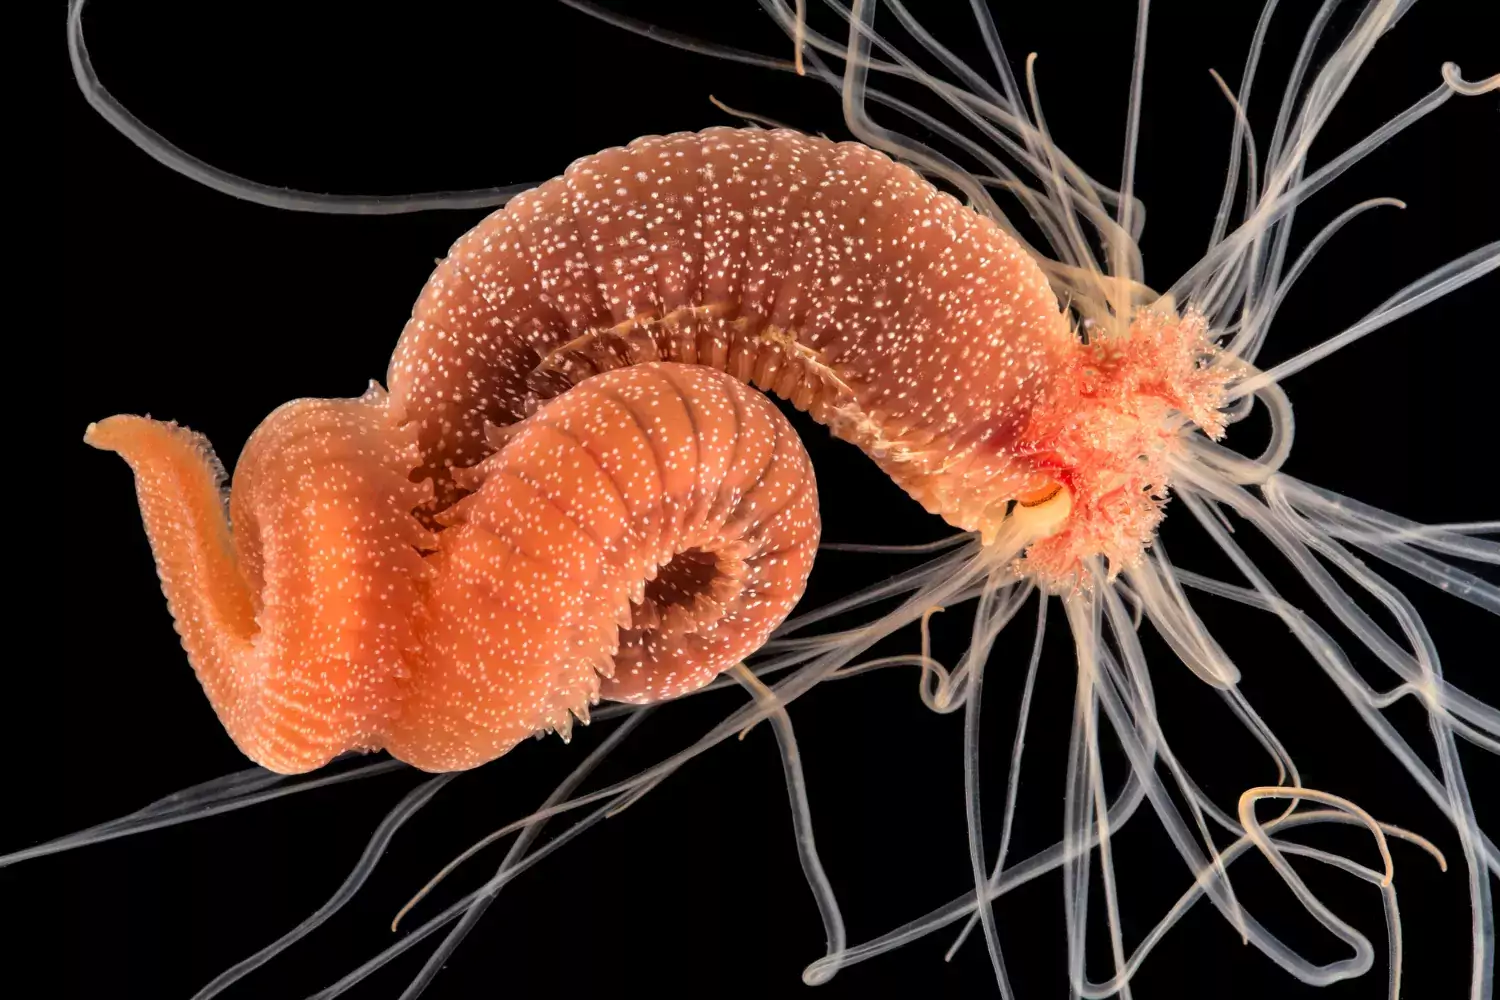 Eupolymnia nebulosa (Swedish name lacking) is a tube-building bristle worm that belongs a group called spaghetti worms, referring to the tentacular crown at the anterior end.,The animal on the photo is about 3 cm long and has been removed from the tube.